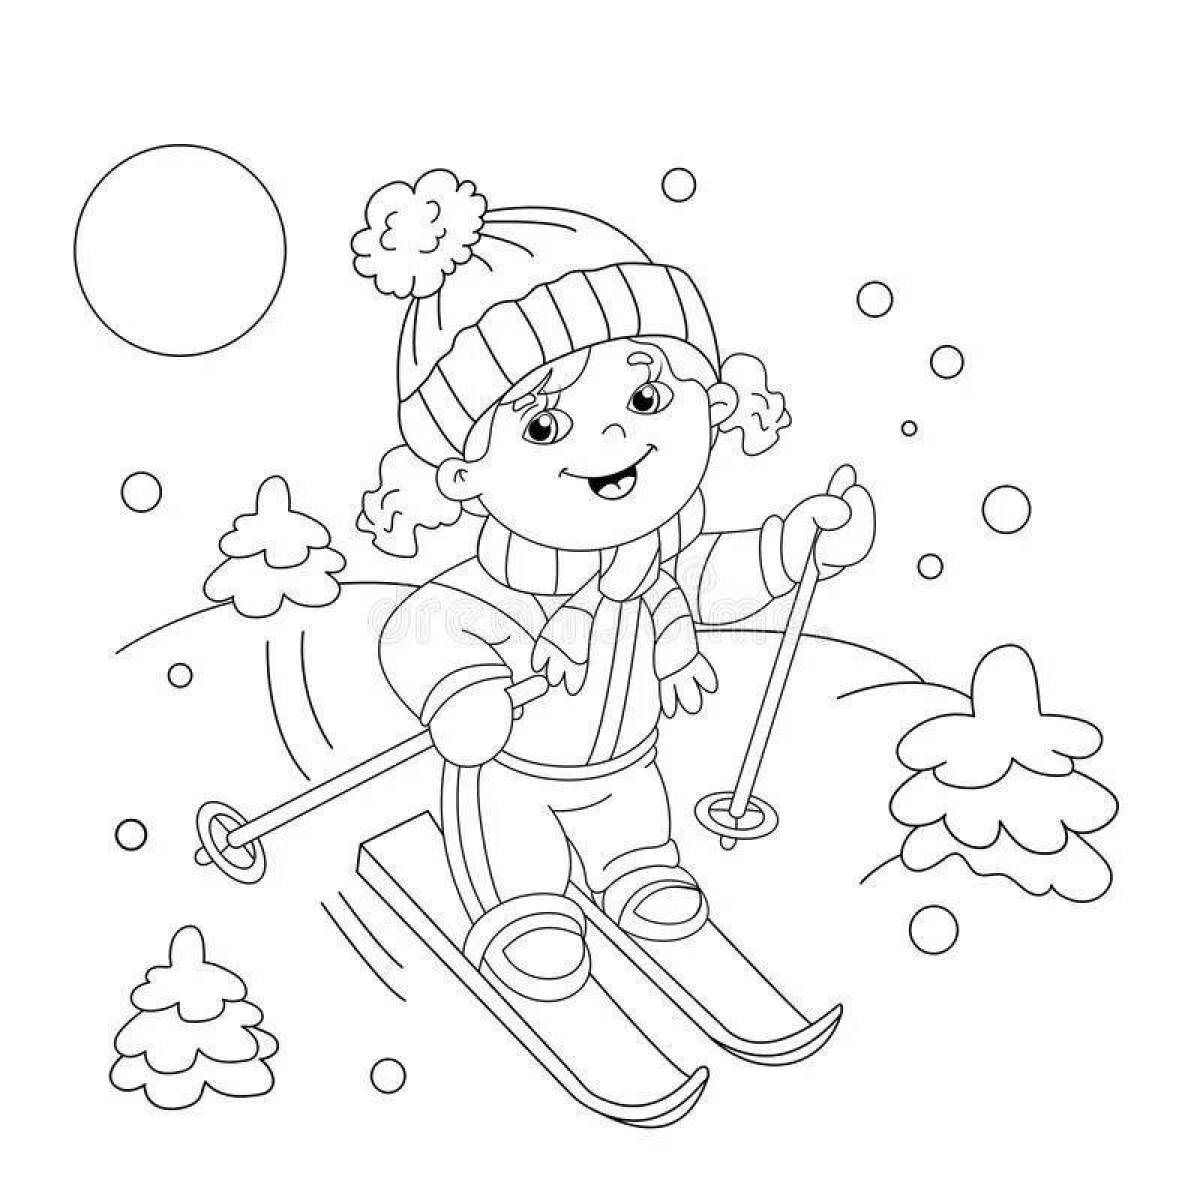 Glitter winter sports coloring pages for kids